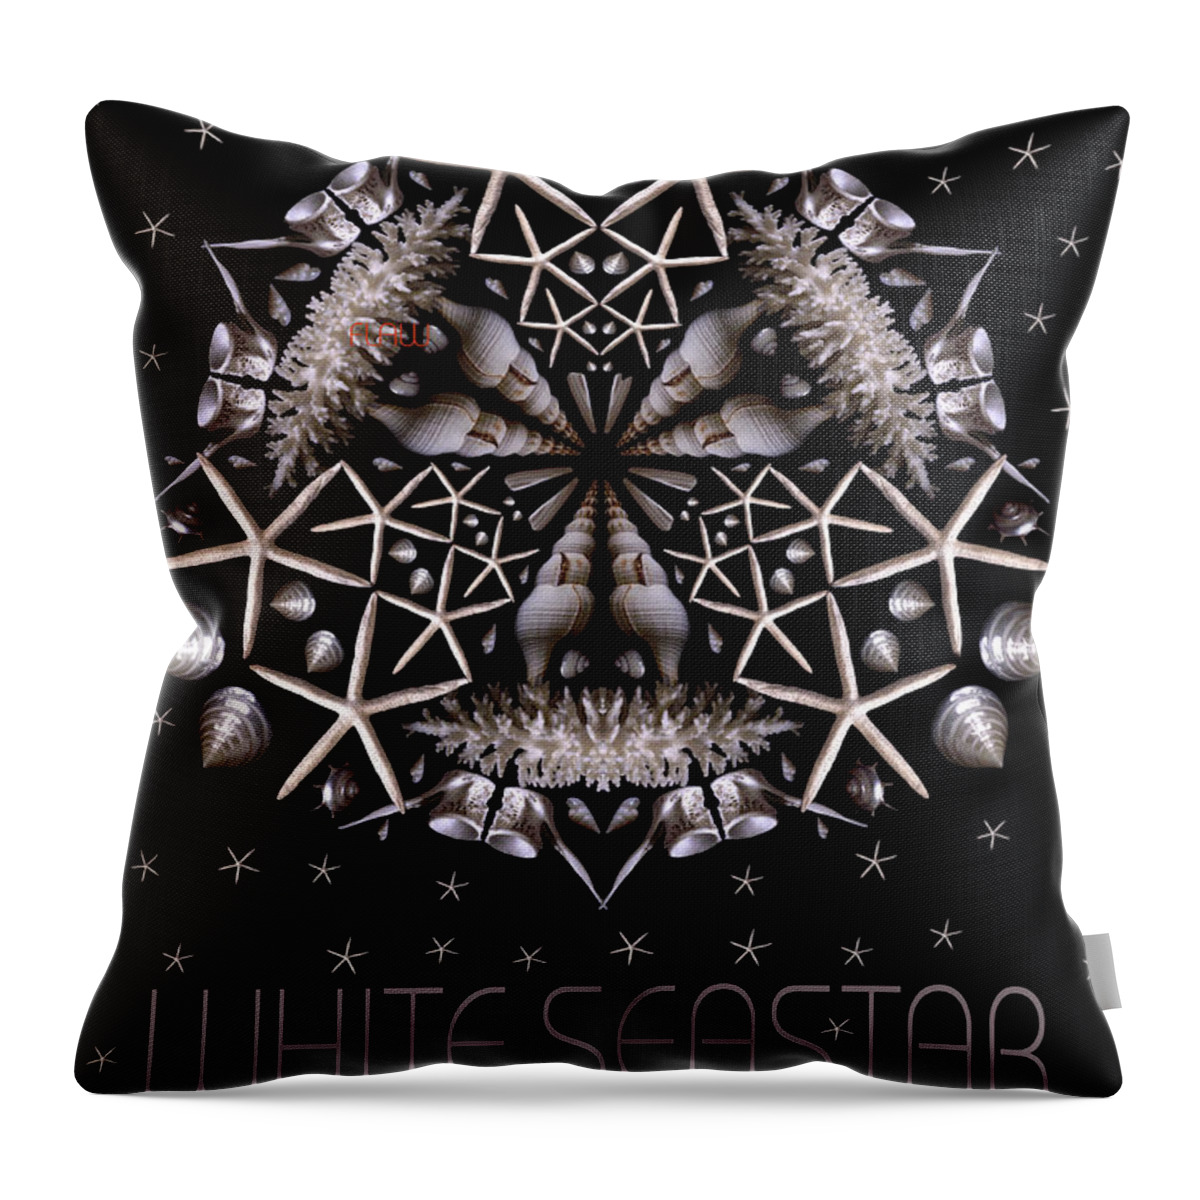 Mandala Throw Pillow featuring the photograph White Seastar by Nancy Griswold